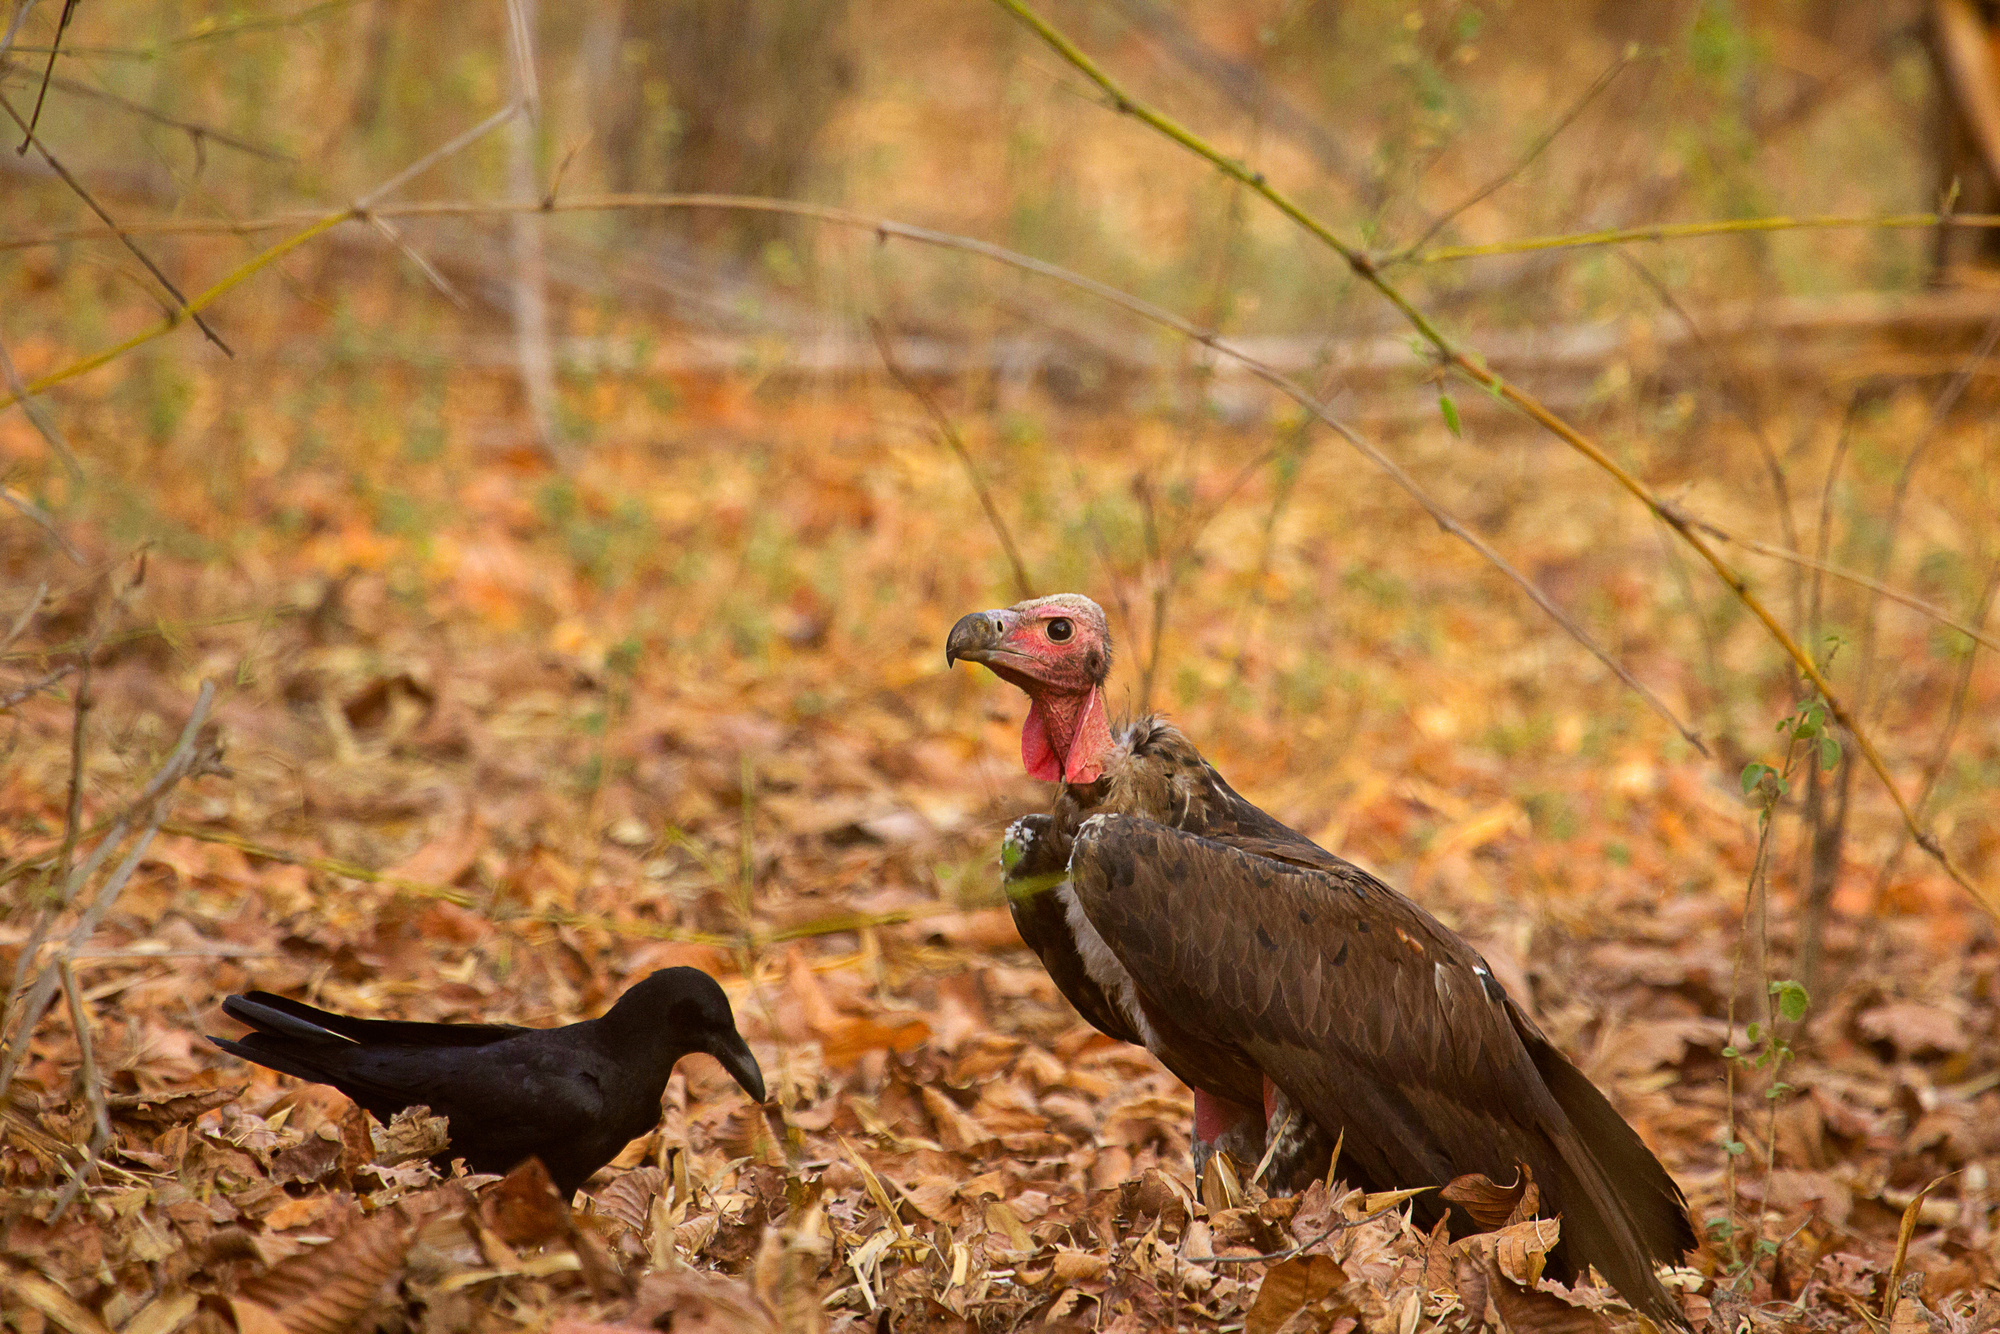 A crow and a vulture with a bright red head stand facing one another on a leaf-covered forest floor.